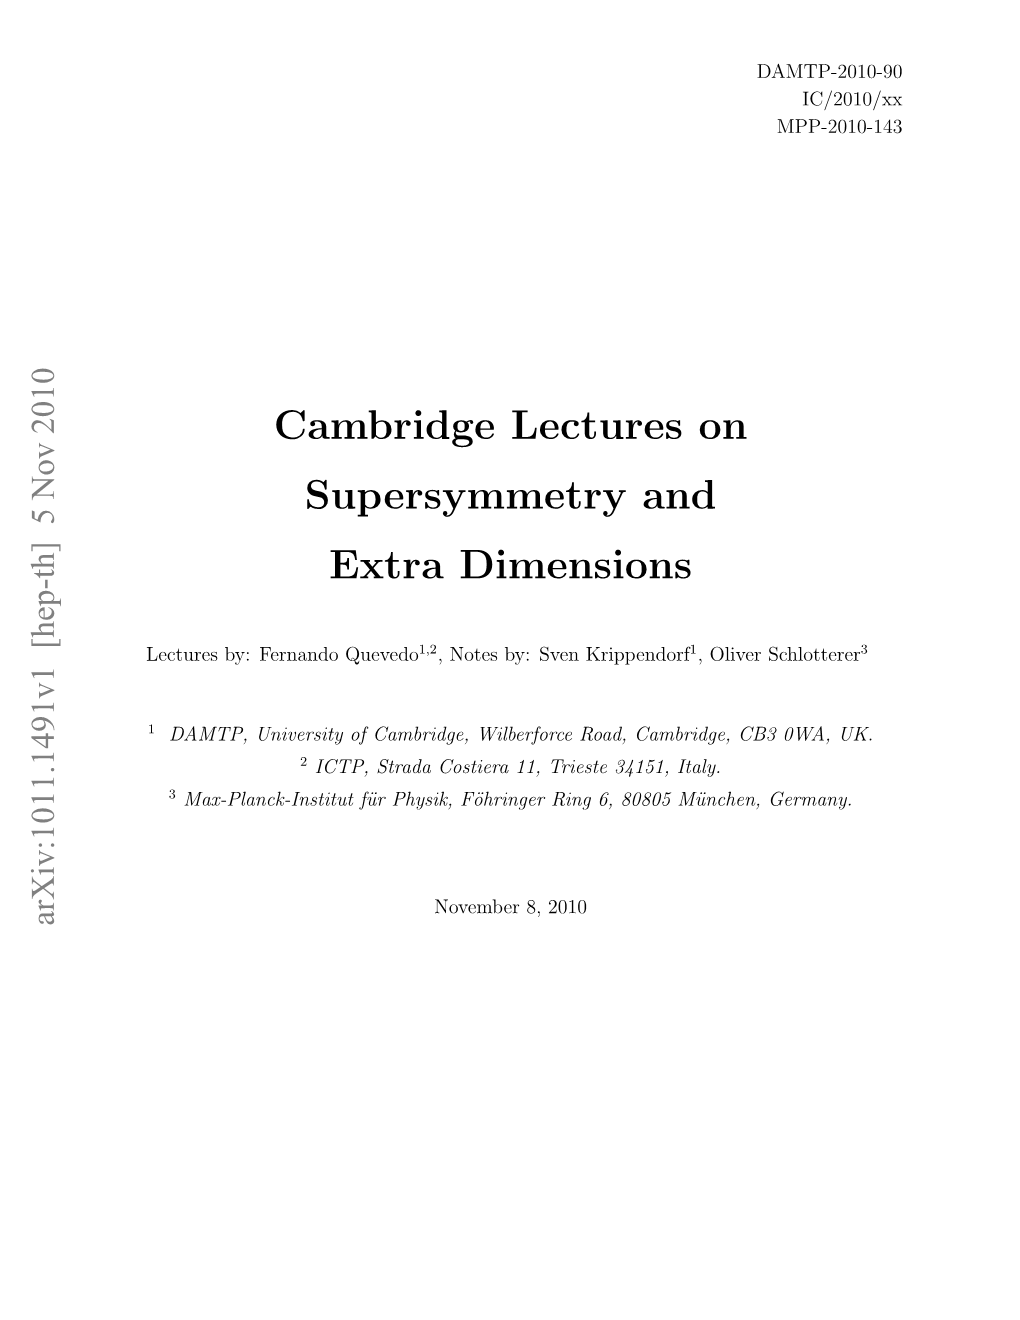 Cambridge Lectures on Supersymmetry and Extra Dimensions